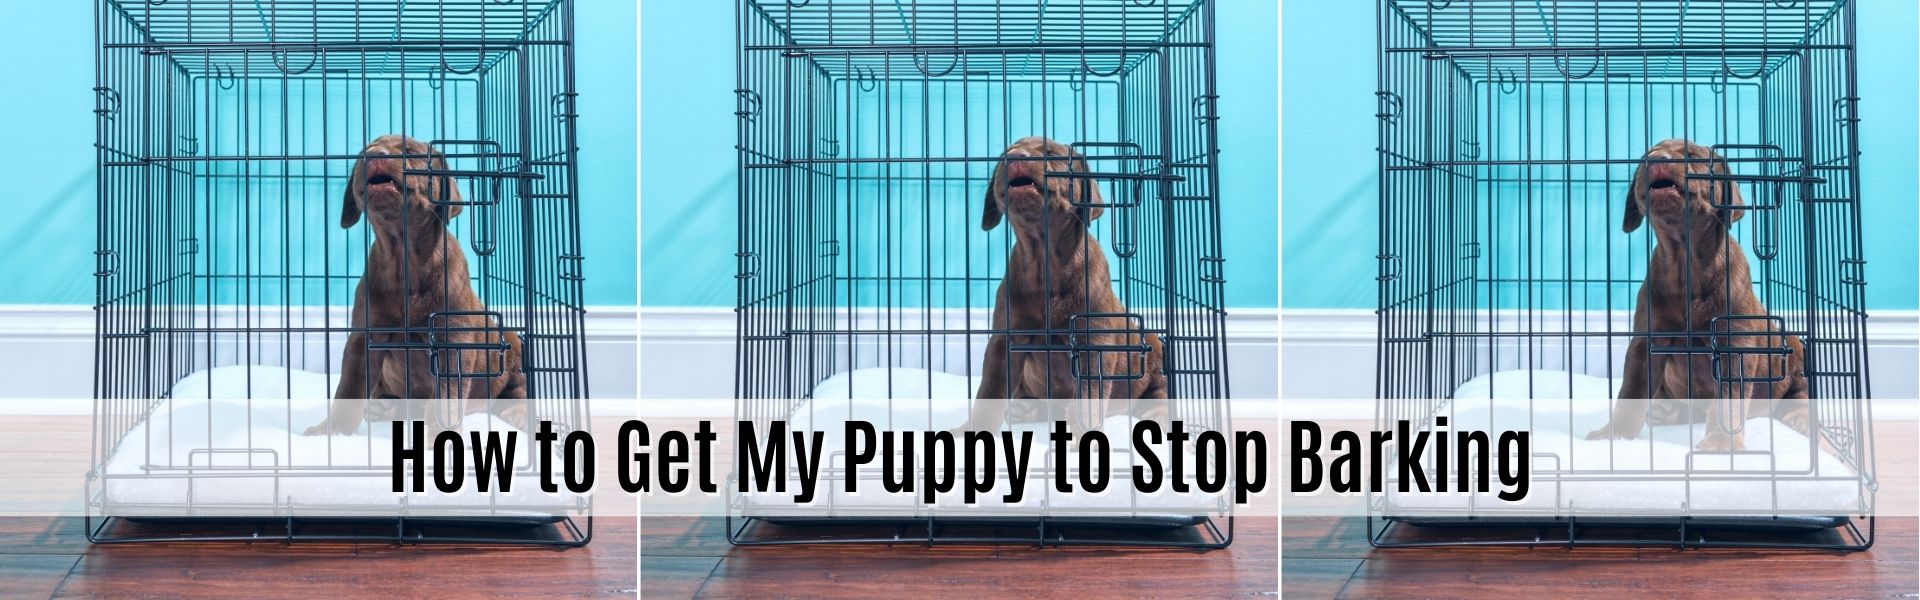 How to Get My Puppy to Stop Barking